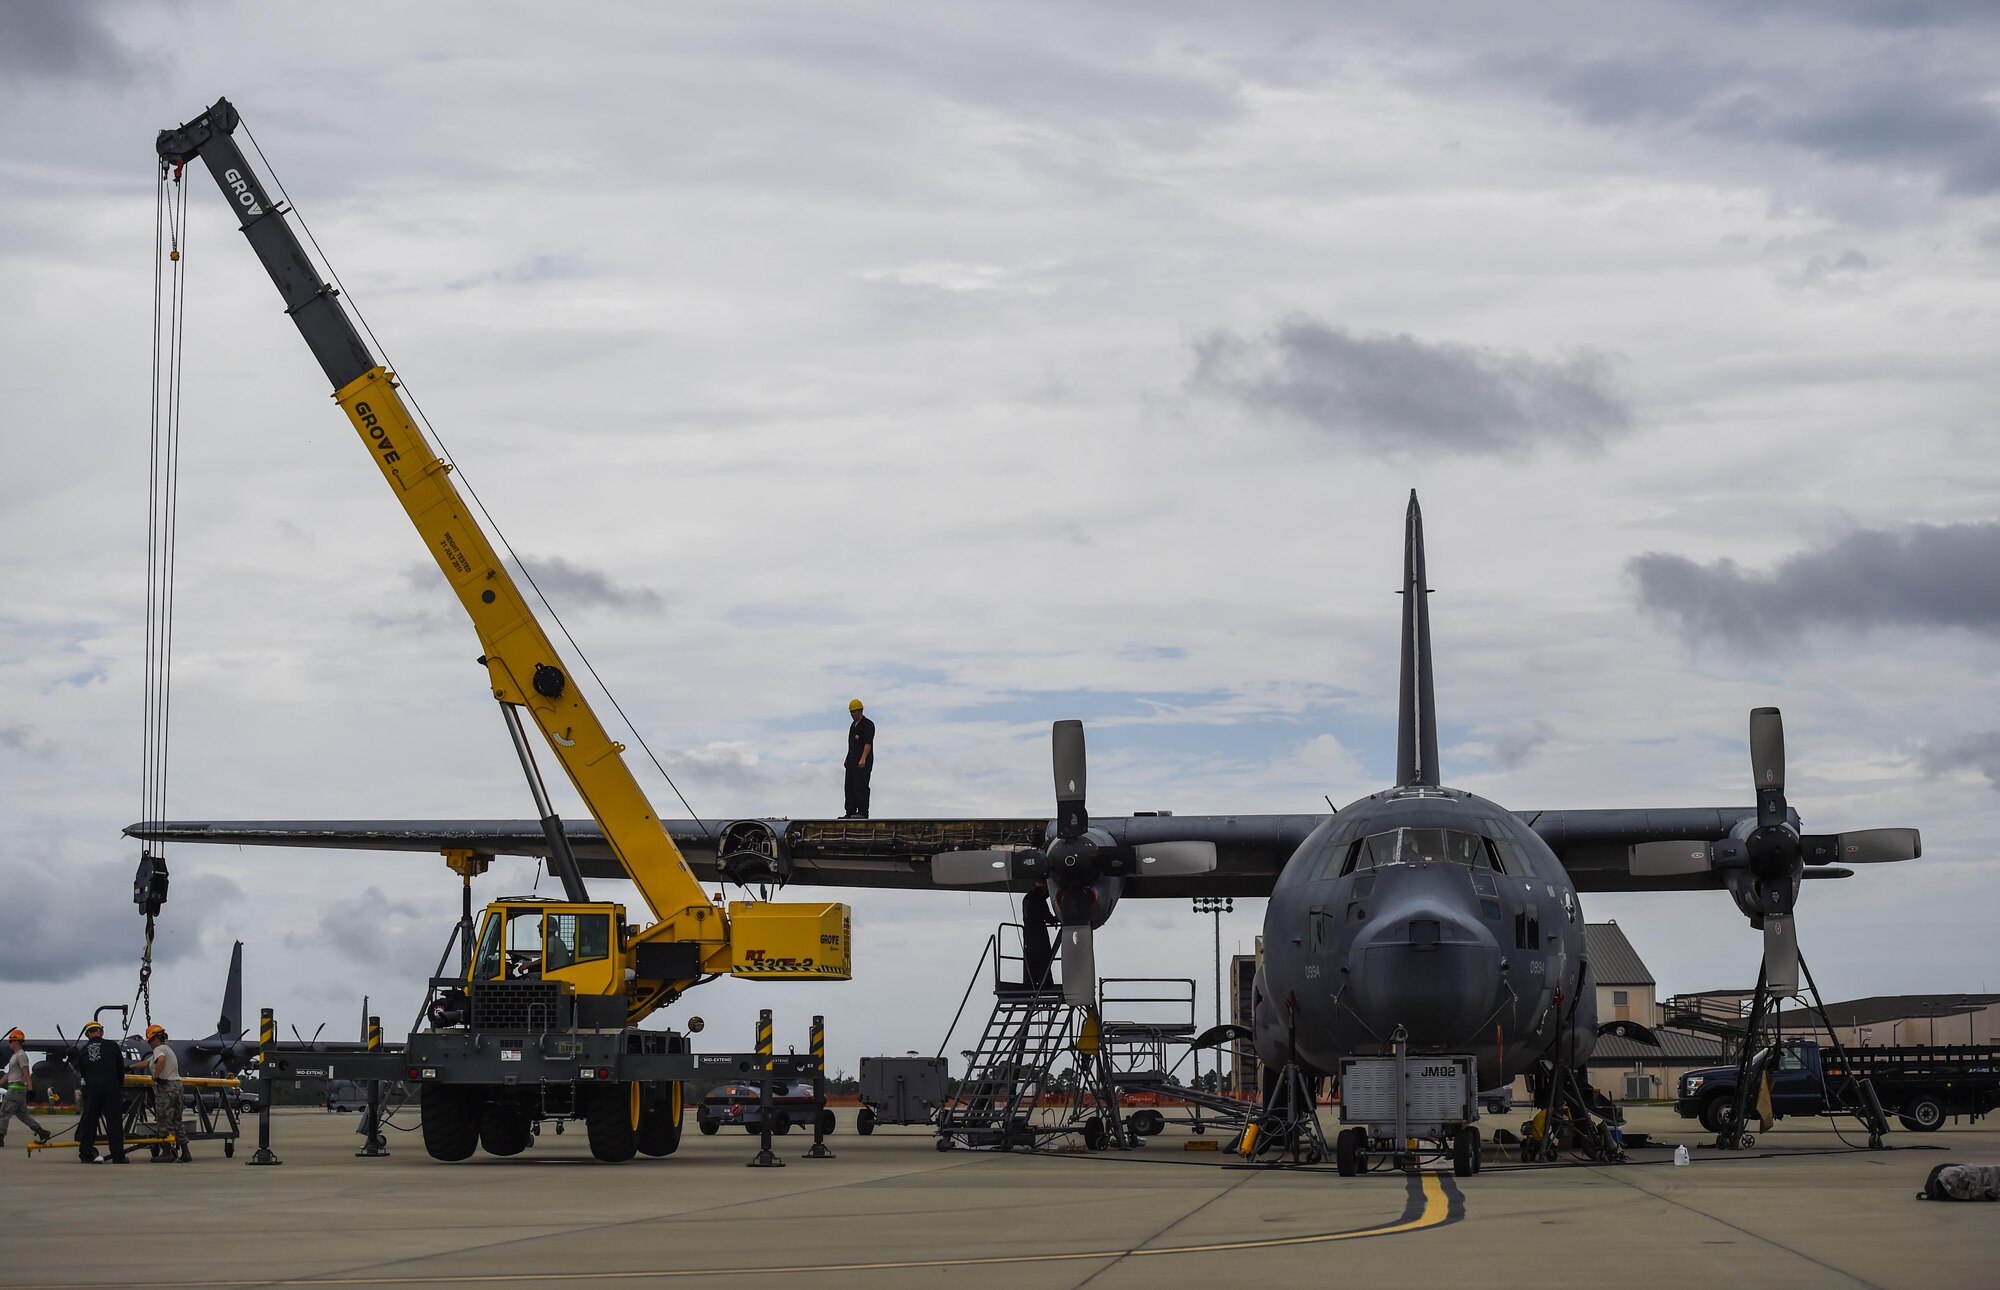 Airmen with the 1st Special Operations Wing and Robins Air Force Base, Ga., remove the wings from an MC-130P Combat Shadow on Hurlburt Field, Fla., Aug. 5, 2015. Wing removal enabled the MC-130P to be towed safely from the flightline to the Hurlburt Field Air Park Aug. 15, 2015. (U.S. Air Force photo by Airman Kai White/Released)